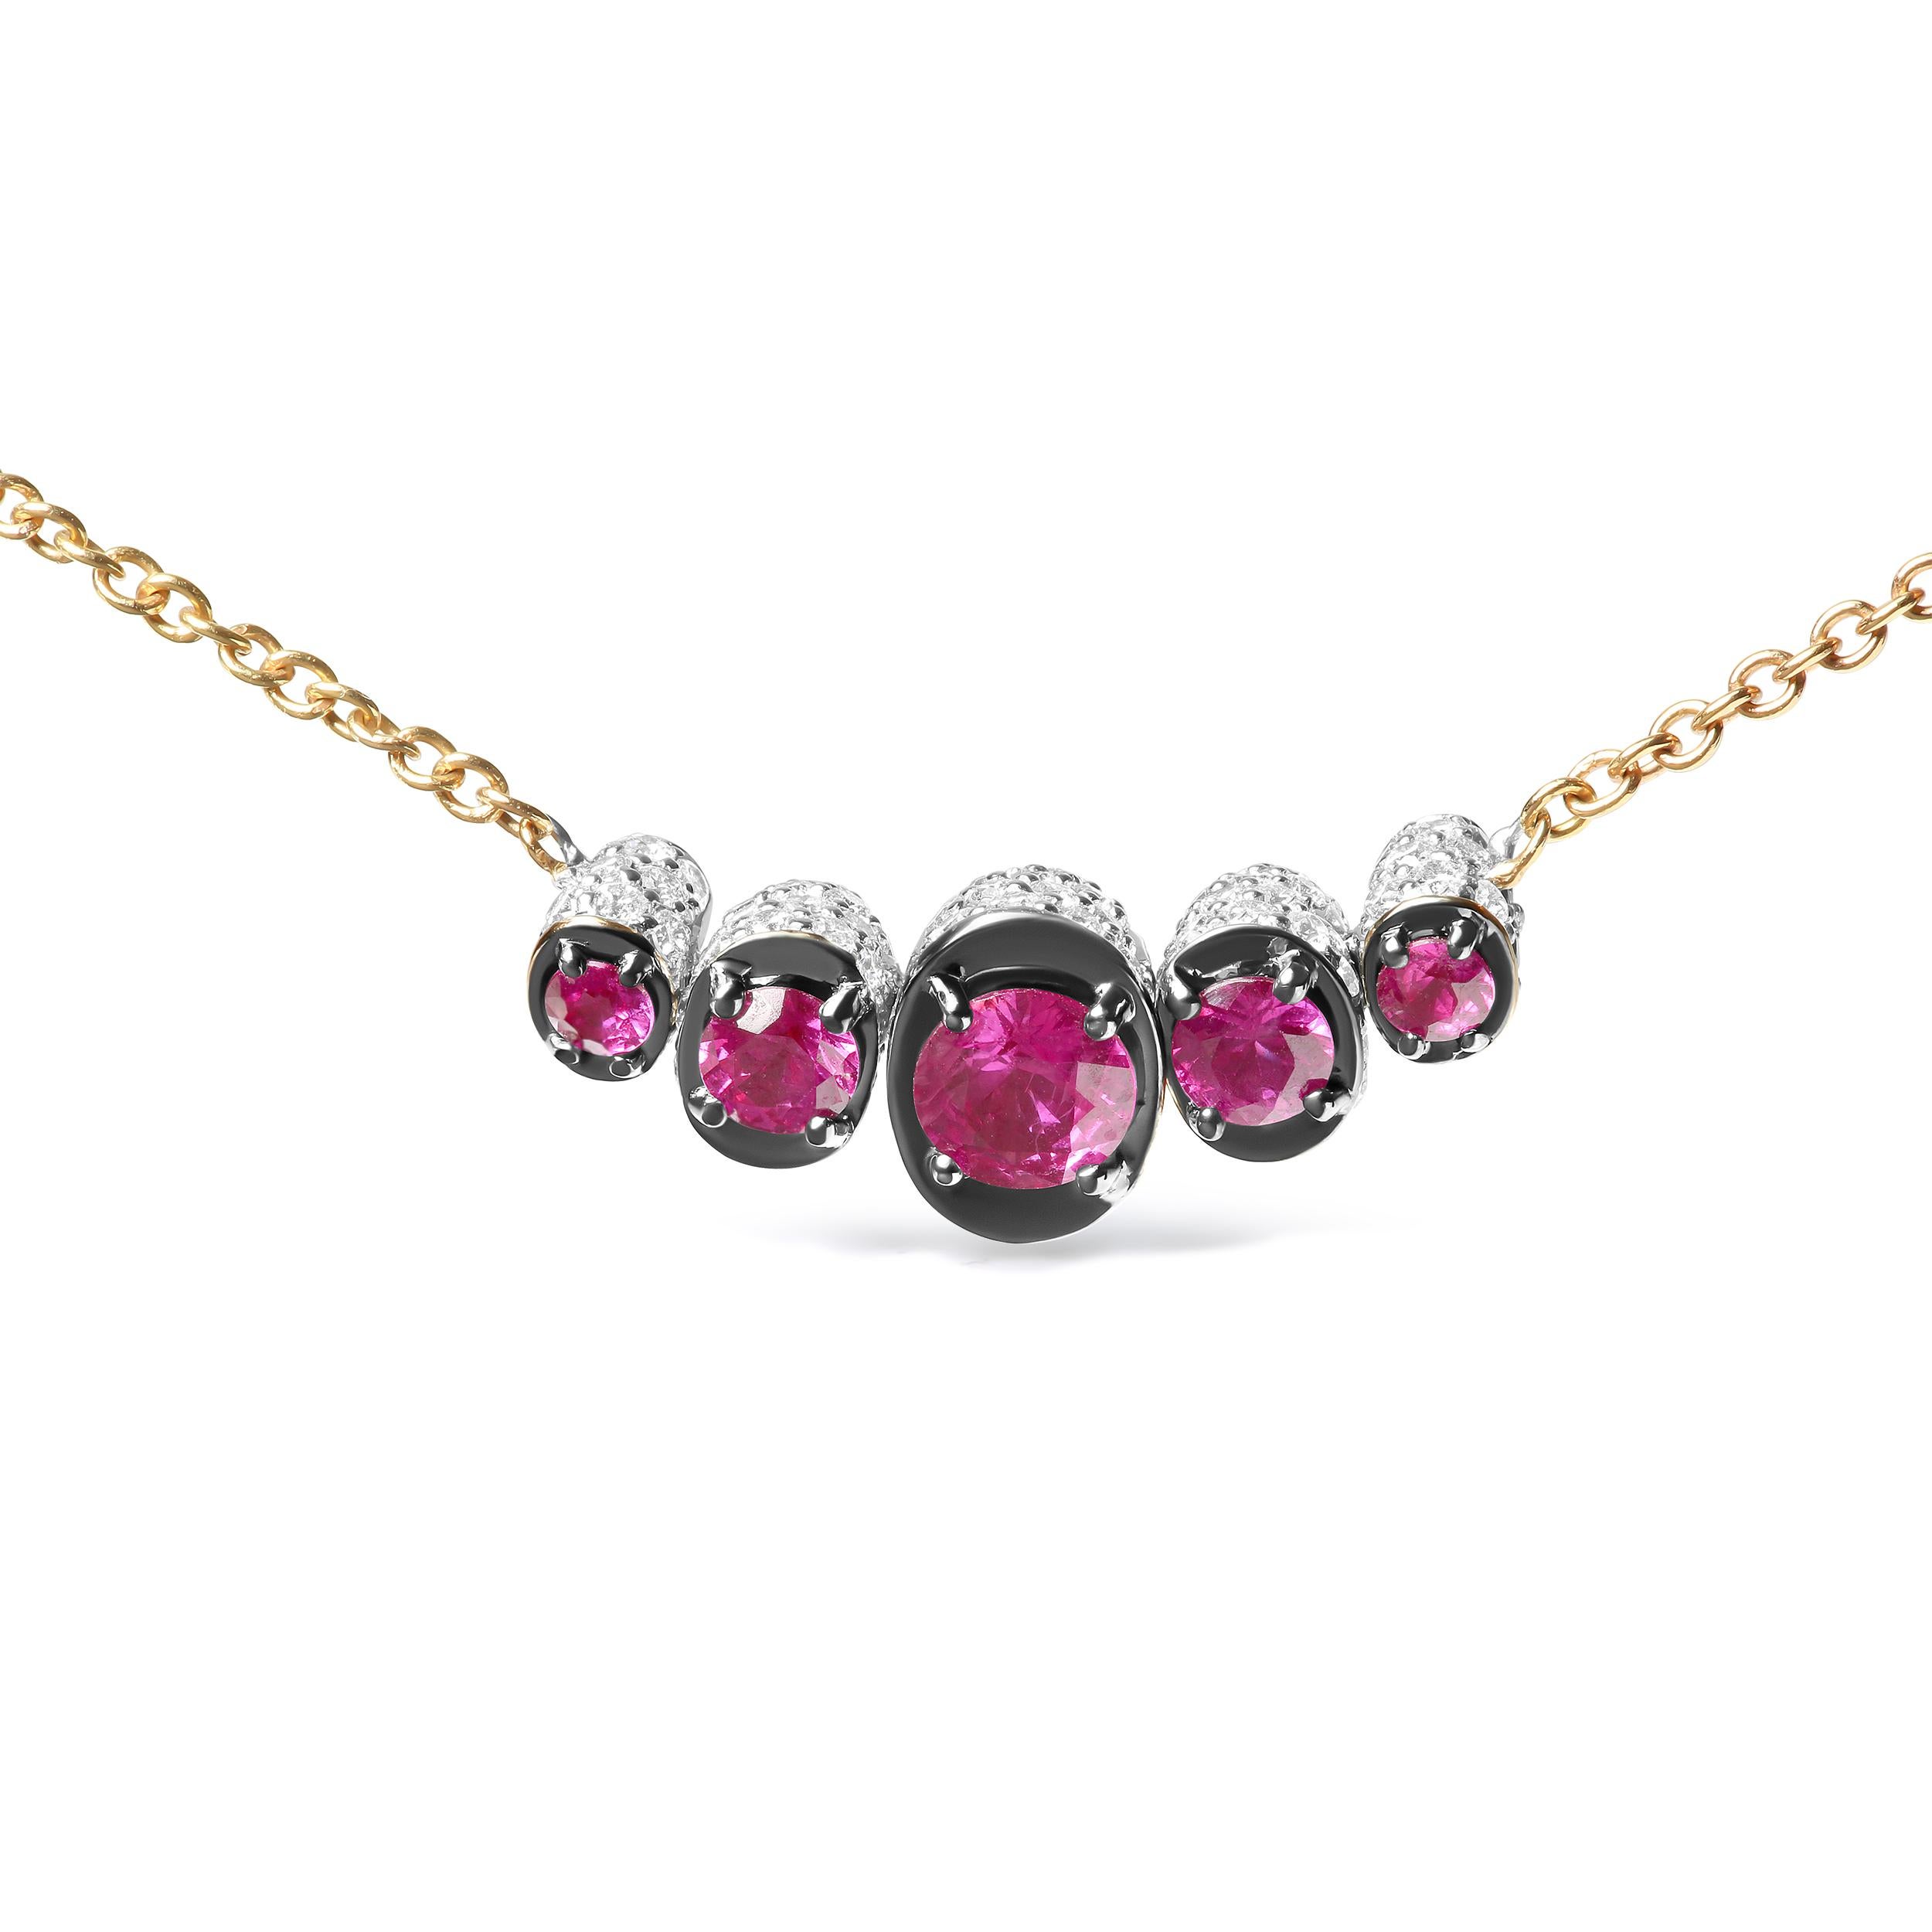 Set in luxurious 18k rose gold, this chocker necklace features a contemporary design of natural round heat-treated red rubies in a 4mm, 3mm, 2mm graduated sizing with the largest at the center, extending out to the smallest on a curved bar.